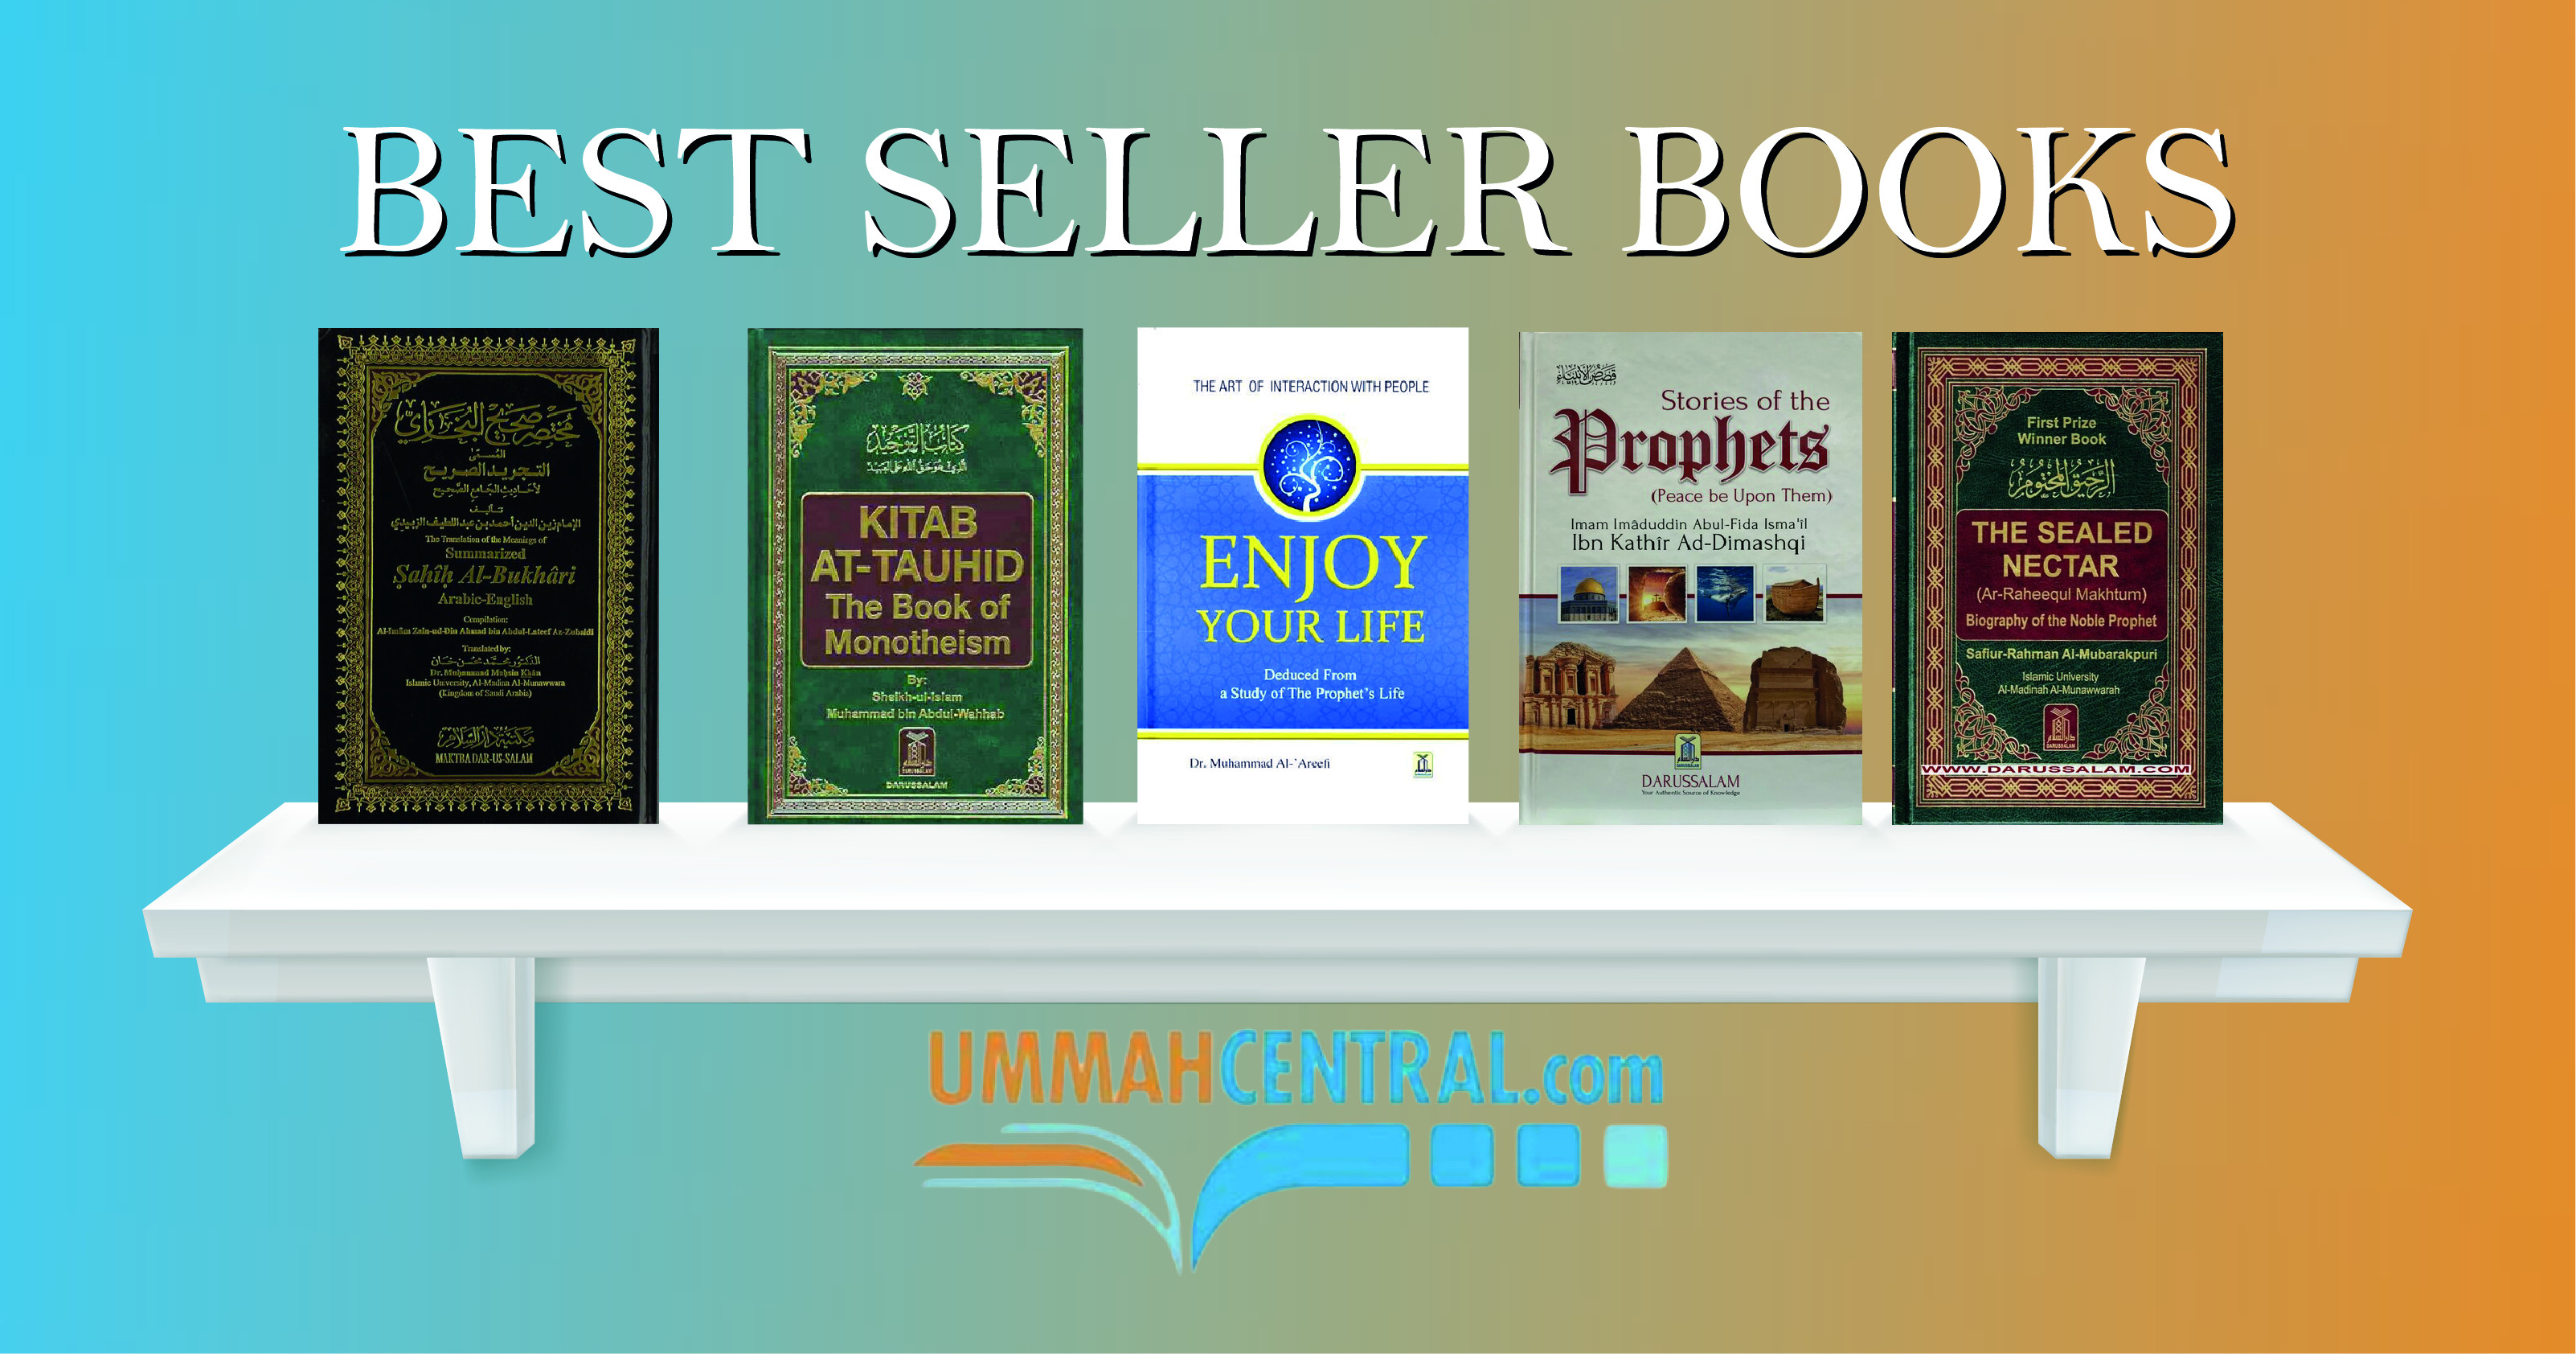 Darussalam best selling books for women and children